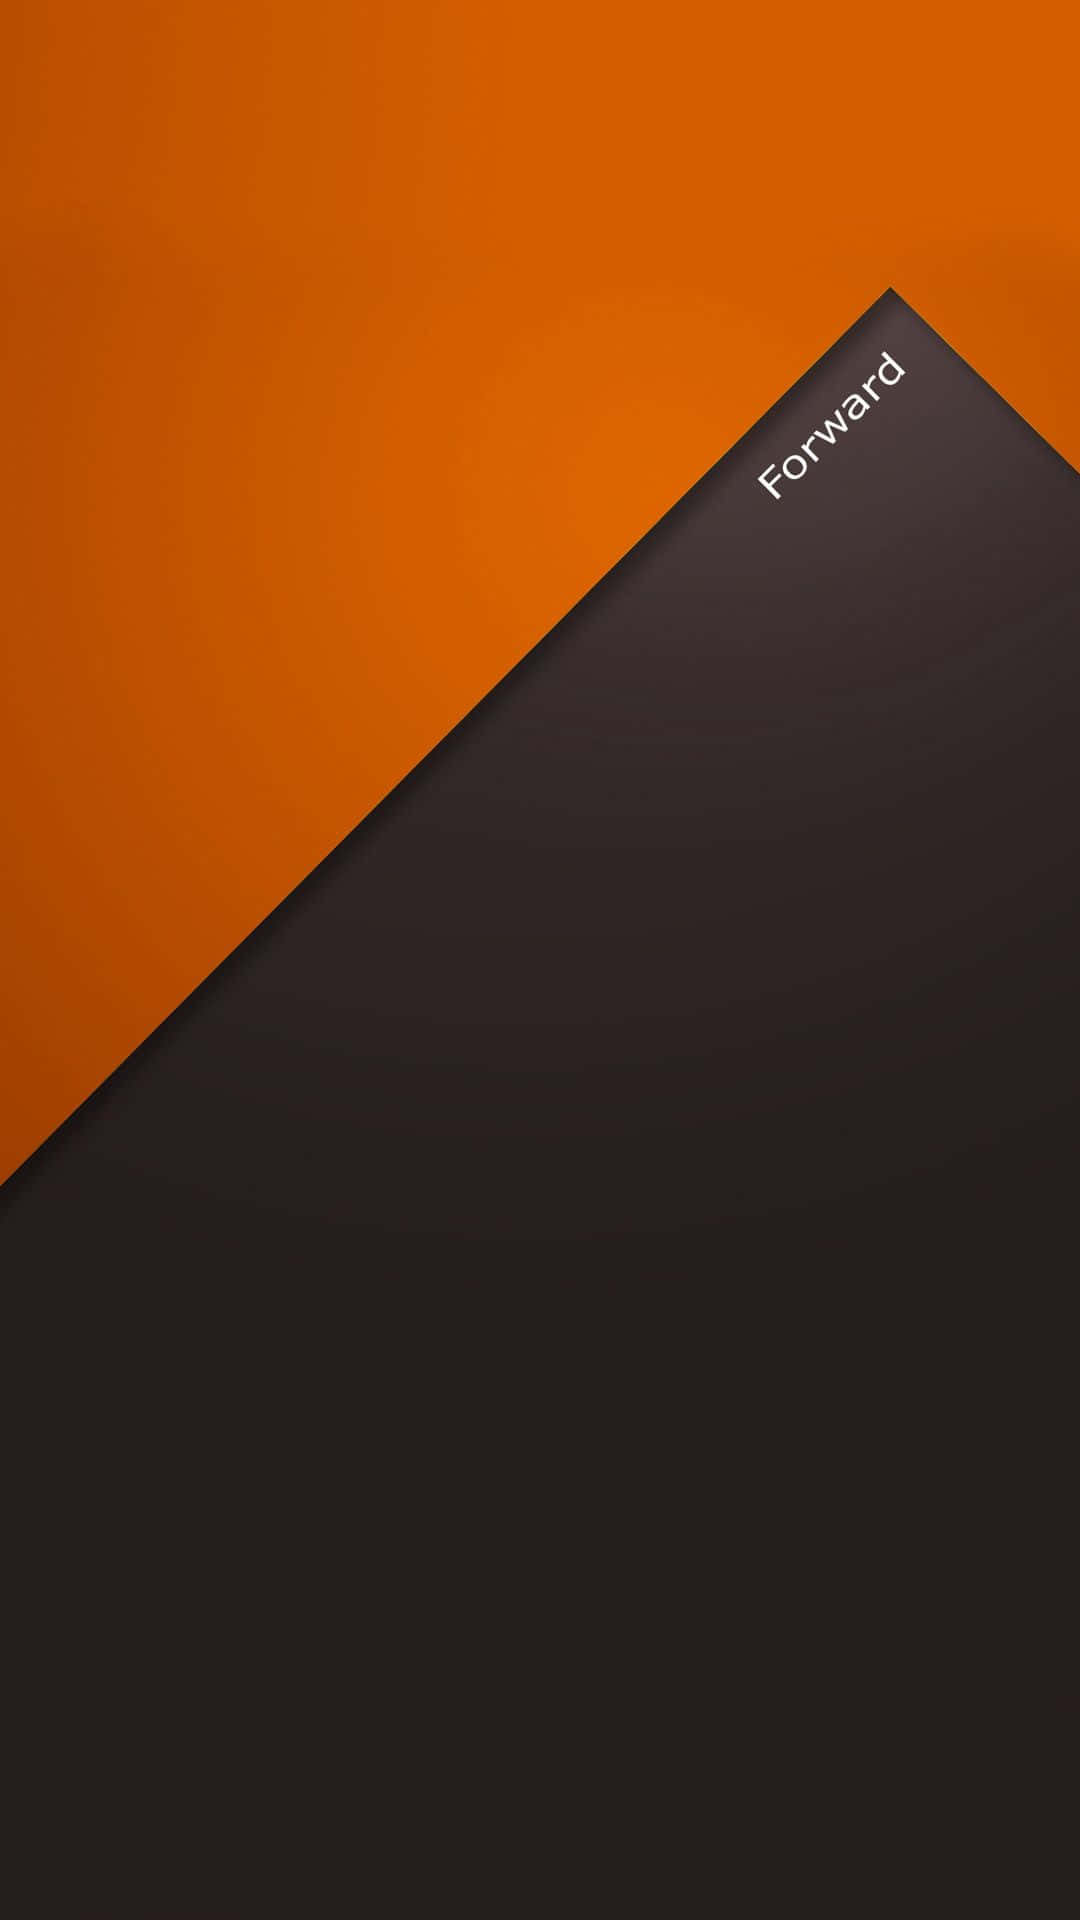 Welcome to the Simplicity of iPhone Design Wallpaper